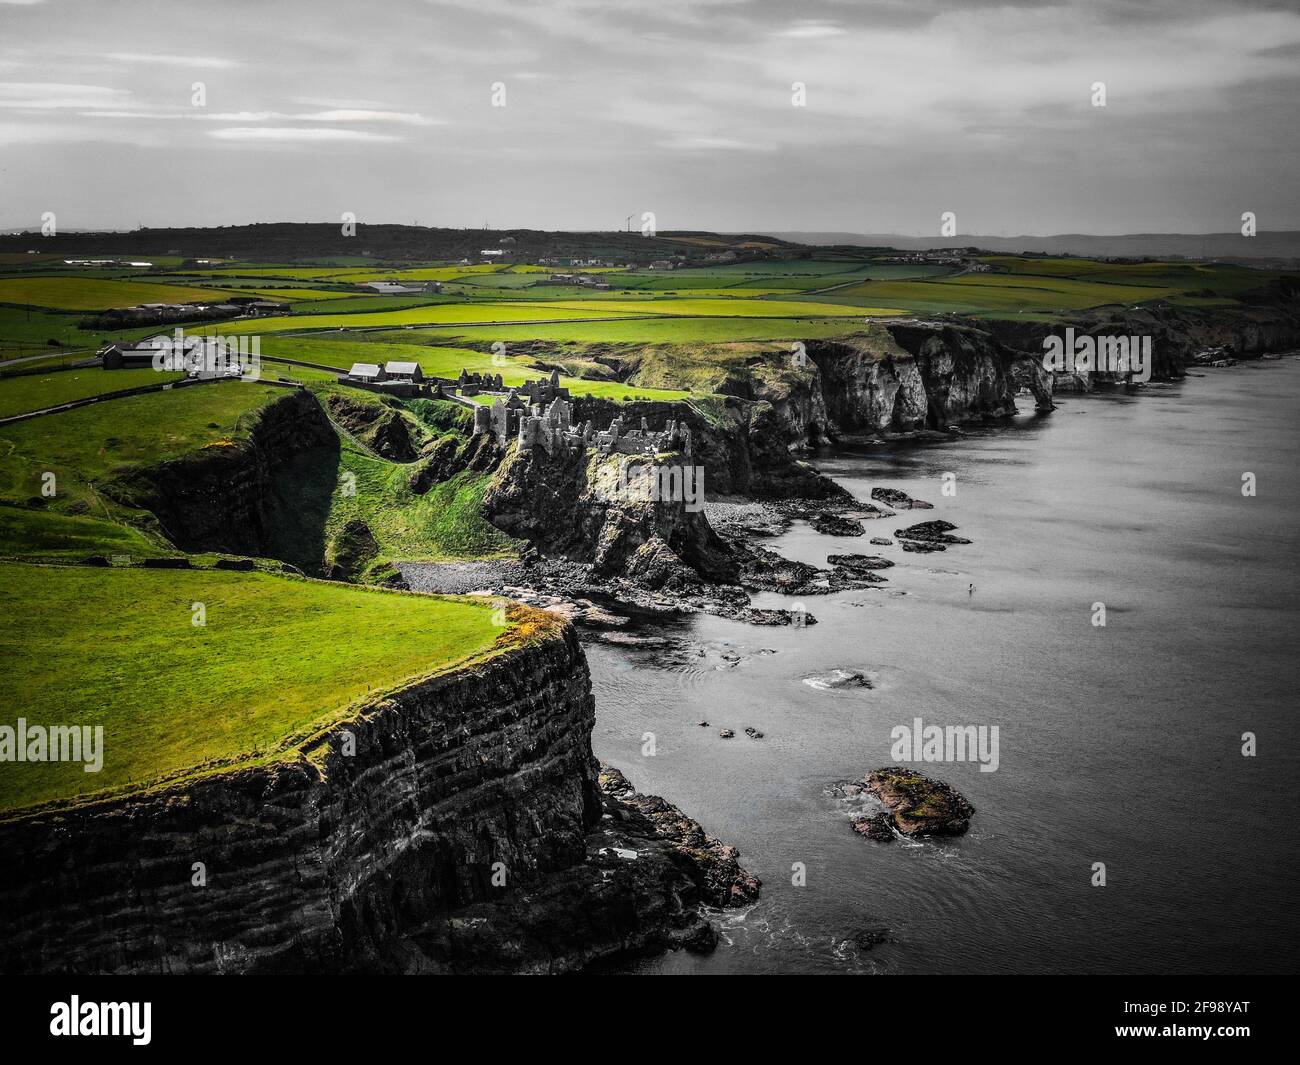 Dunluce Castle in Northern Ireland - a famous movie location - aerial photography Stock Photo